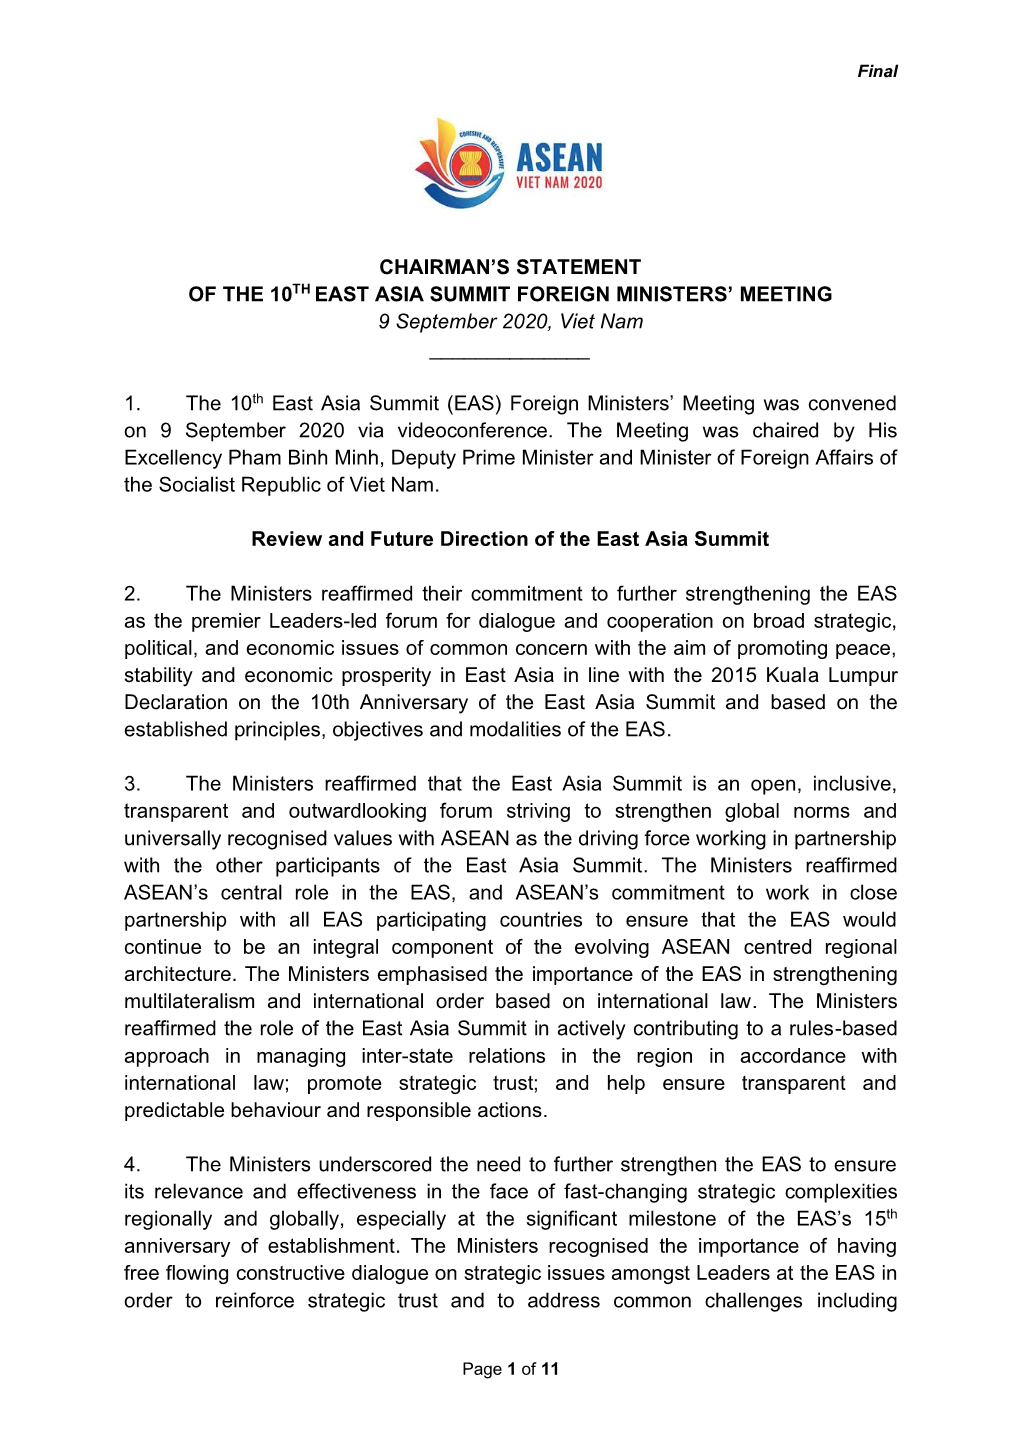 Chairman's Statement of the 10Th East Asia Summit